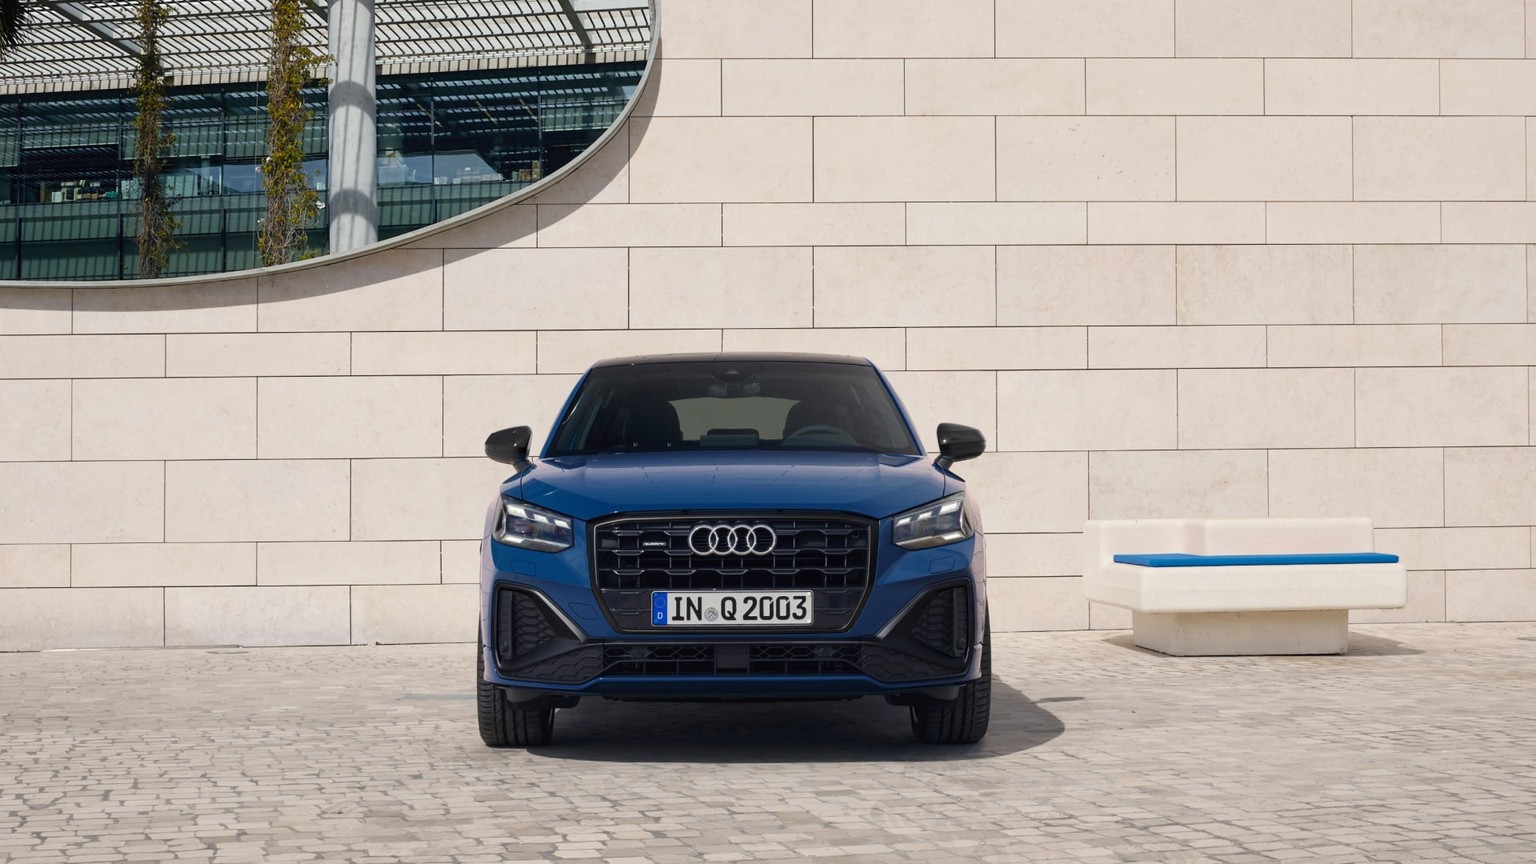 Front view of the Audi Q2